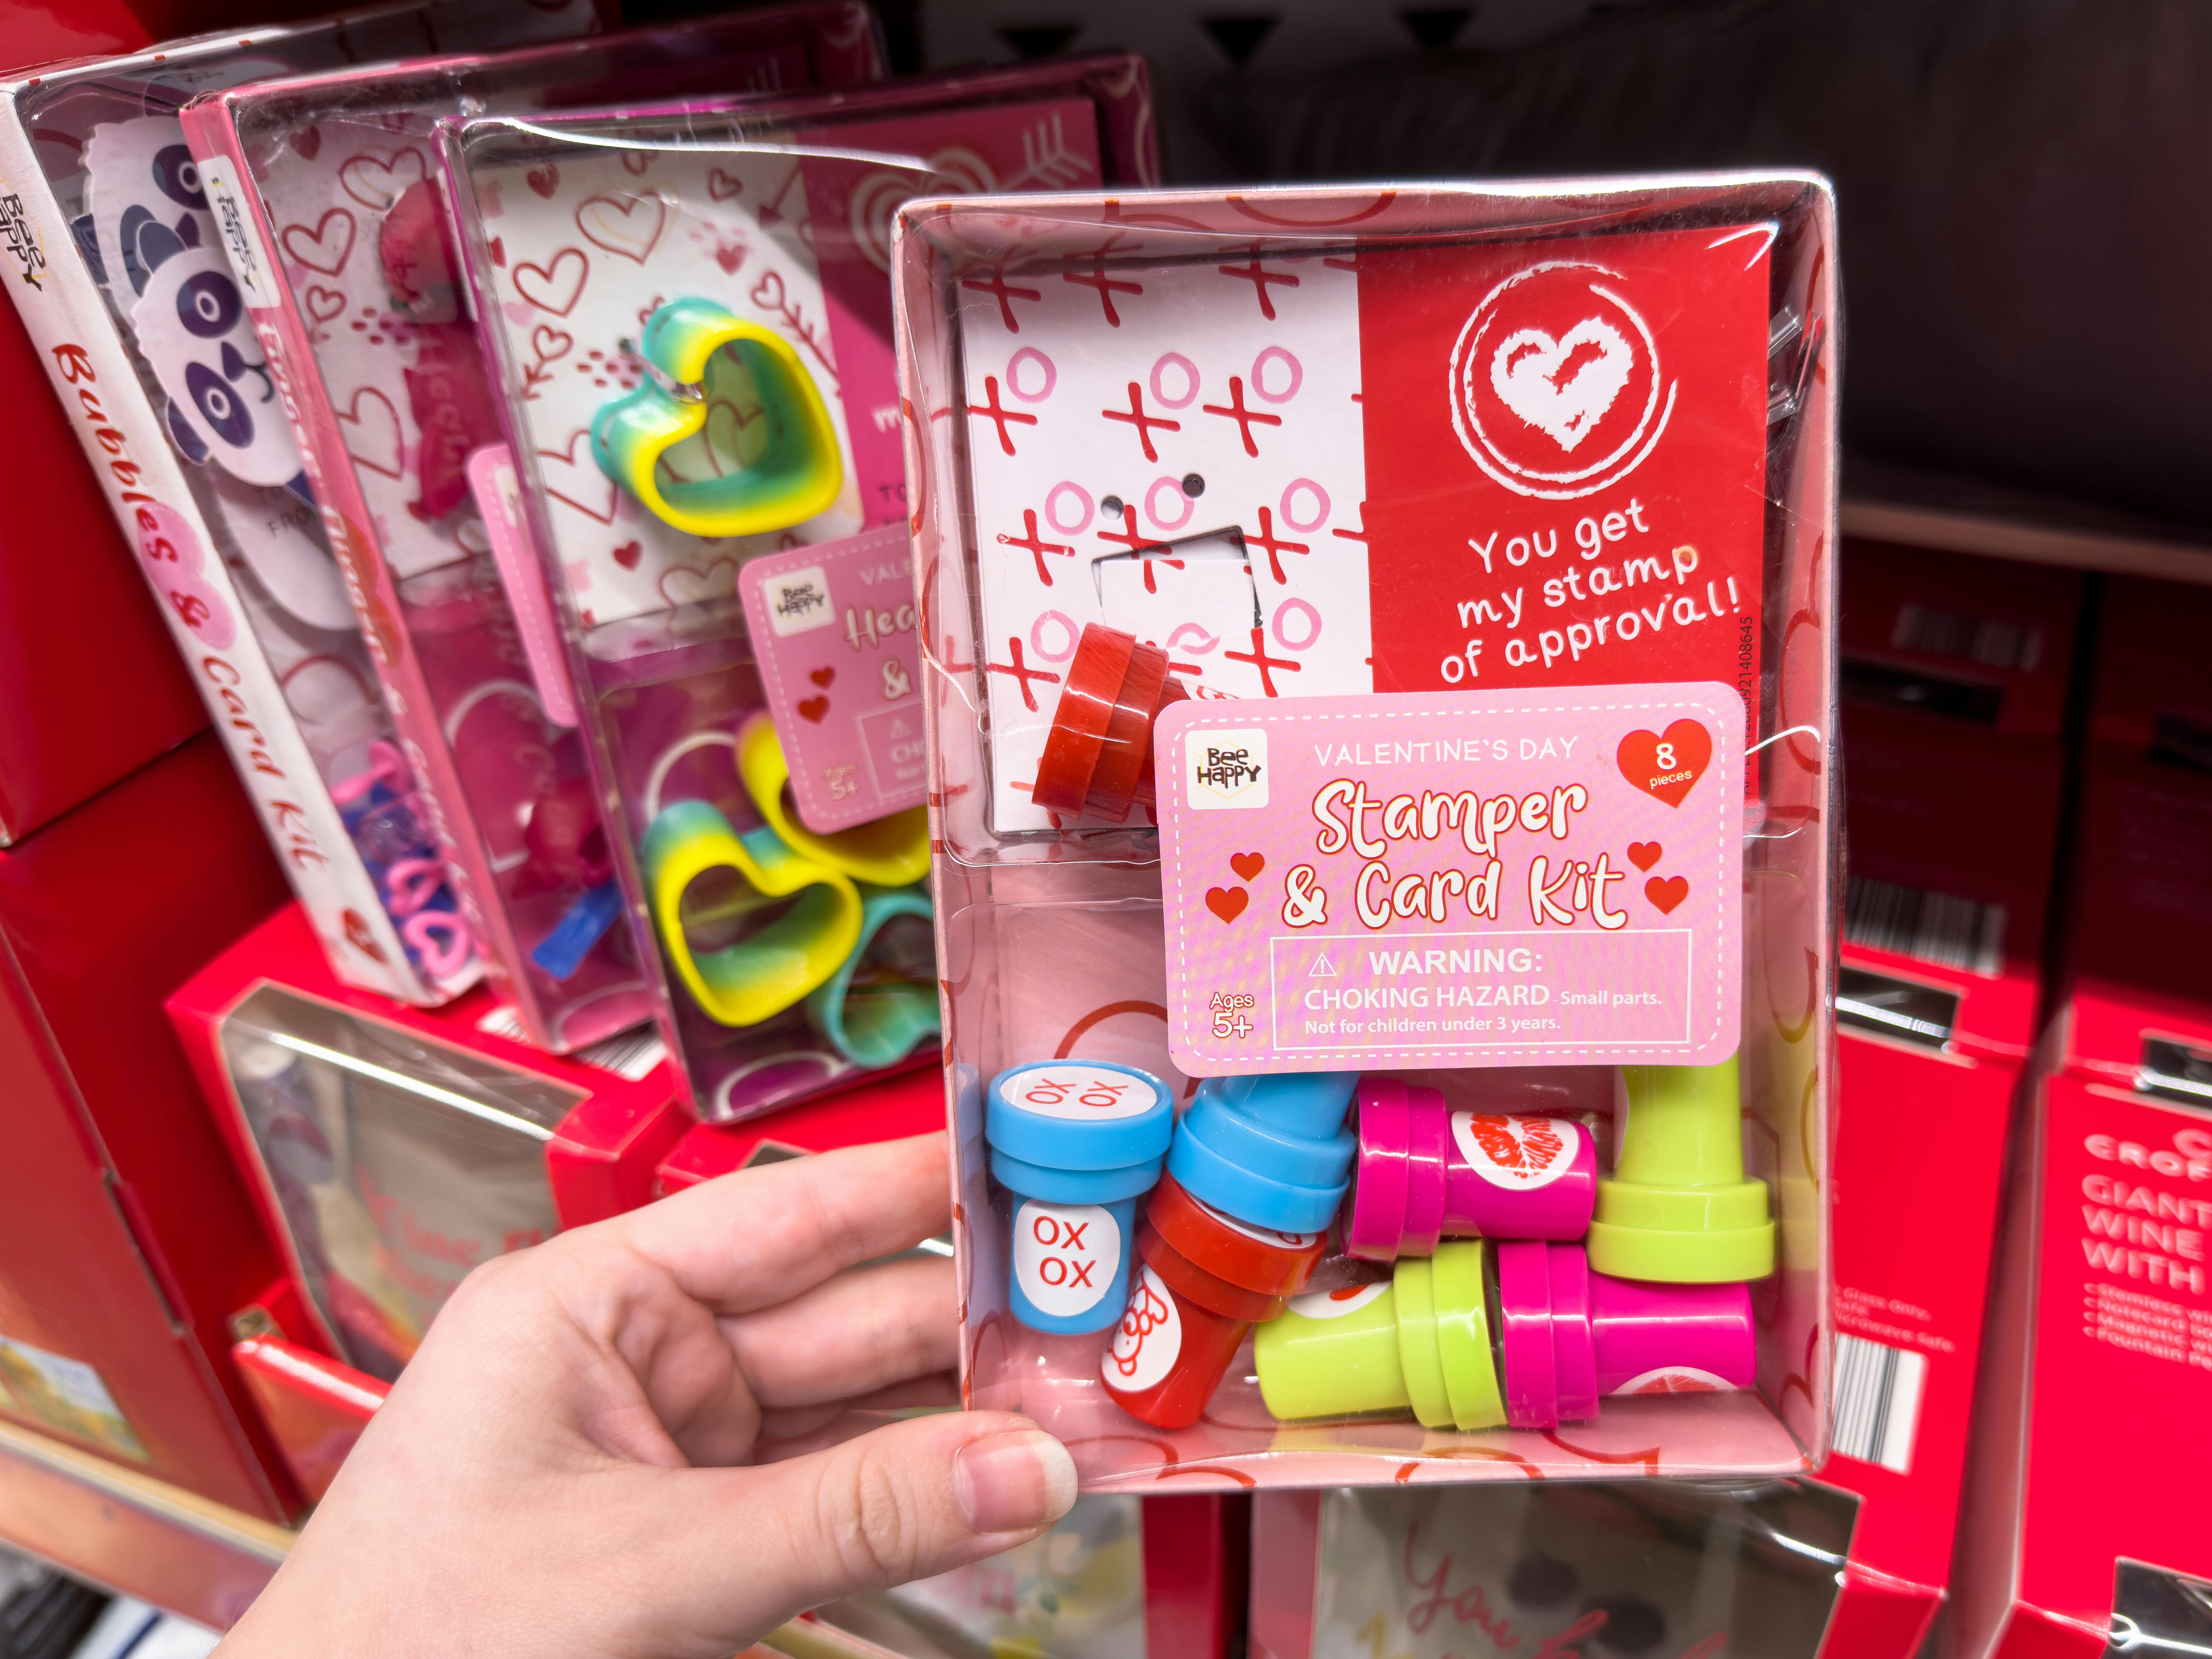 Someone holding a Stampers and card Valentine's Day kit at Aldi